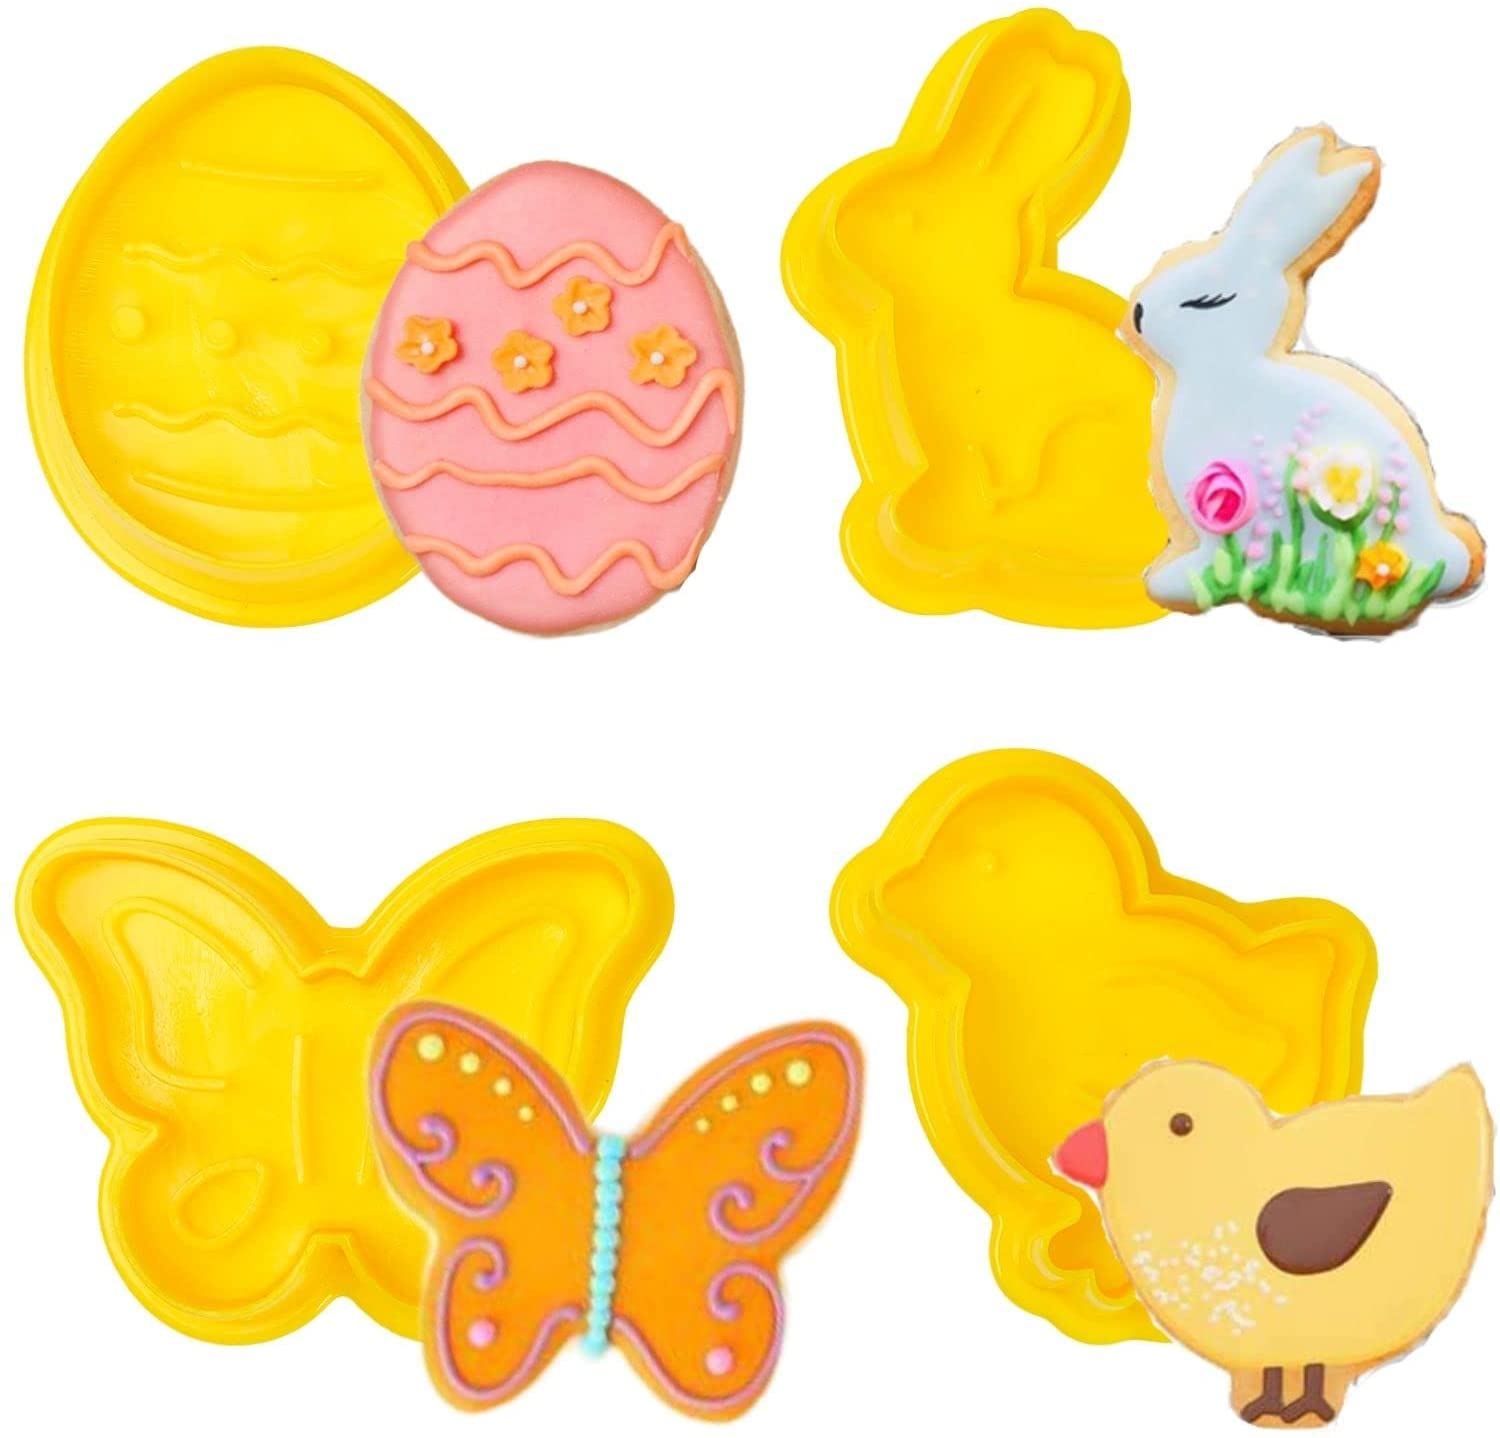 Keepaty 4pc Easter Cookie Cutter Set 3D Plastic Embosser RRP 5.99 CLEARANCE XL 2.99